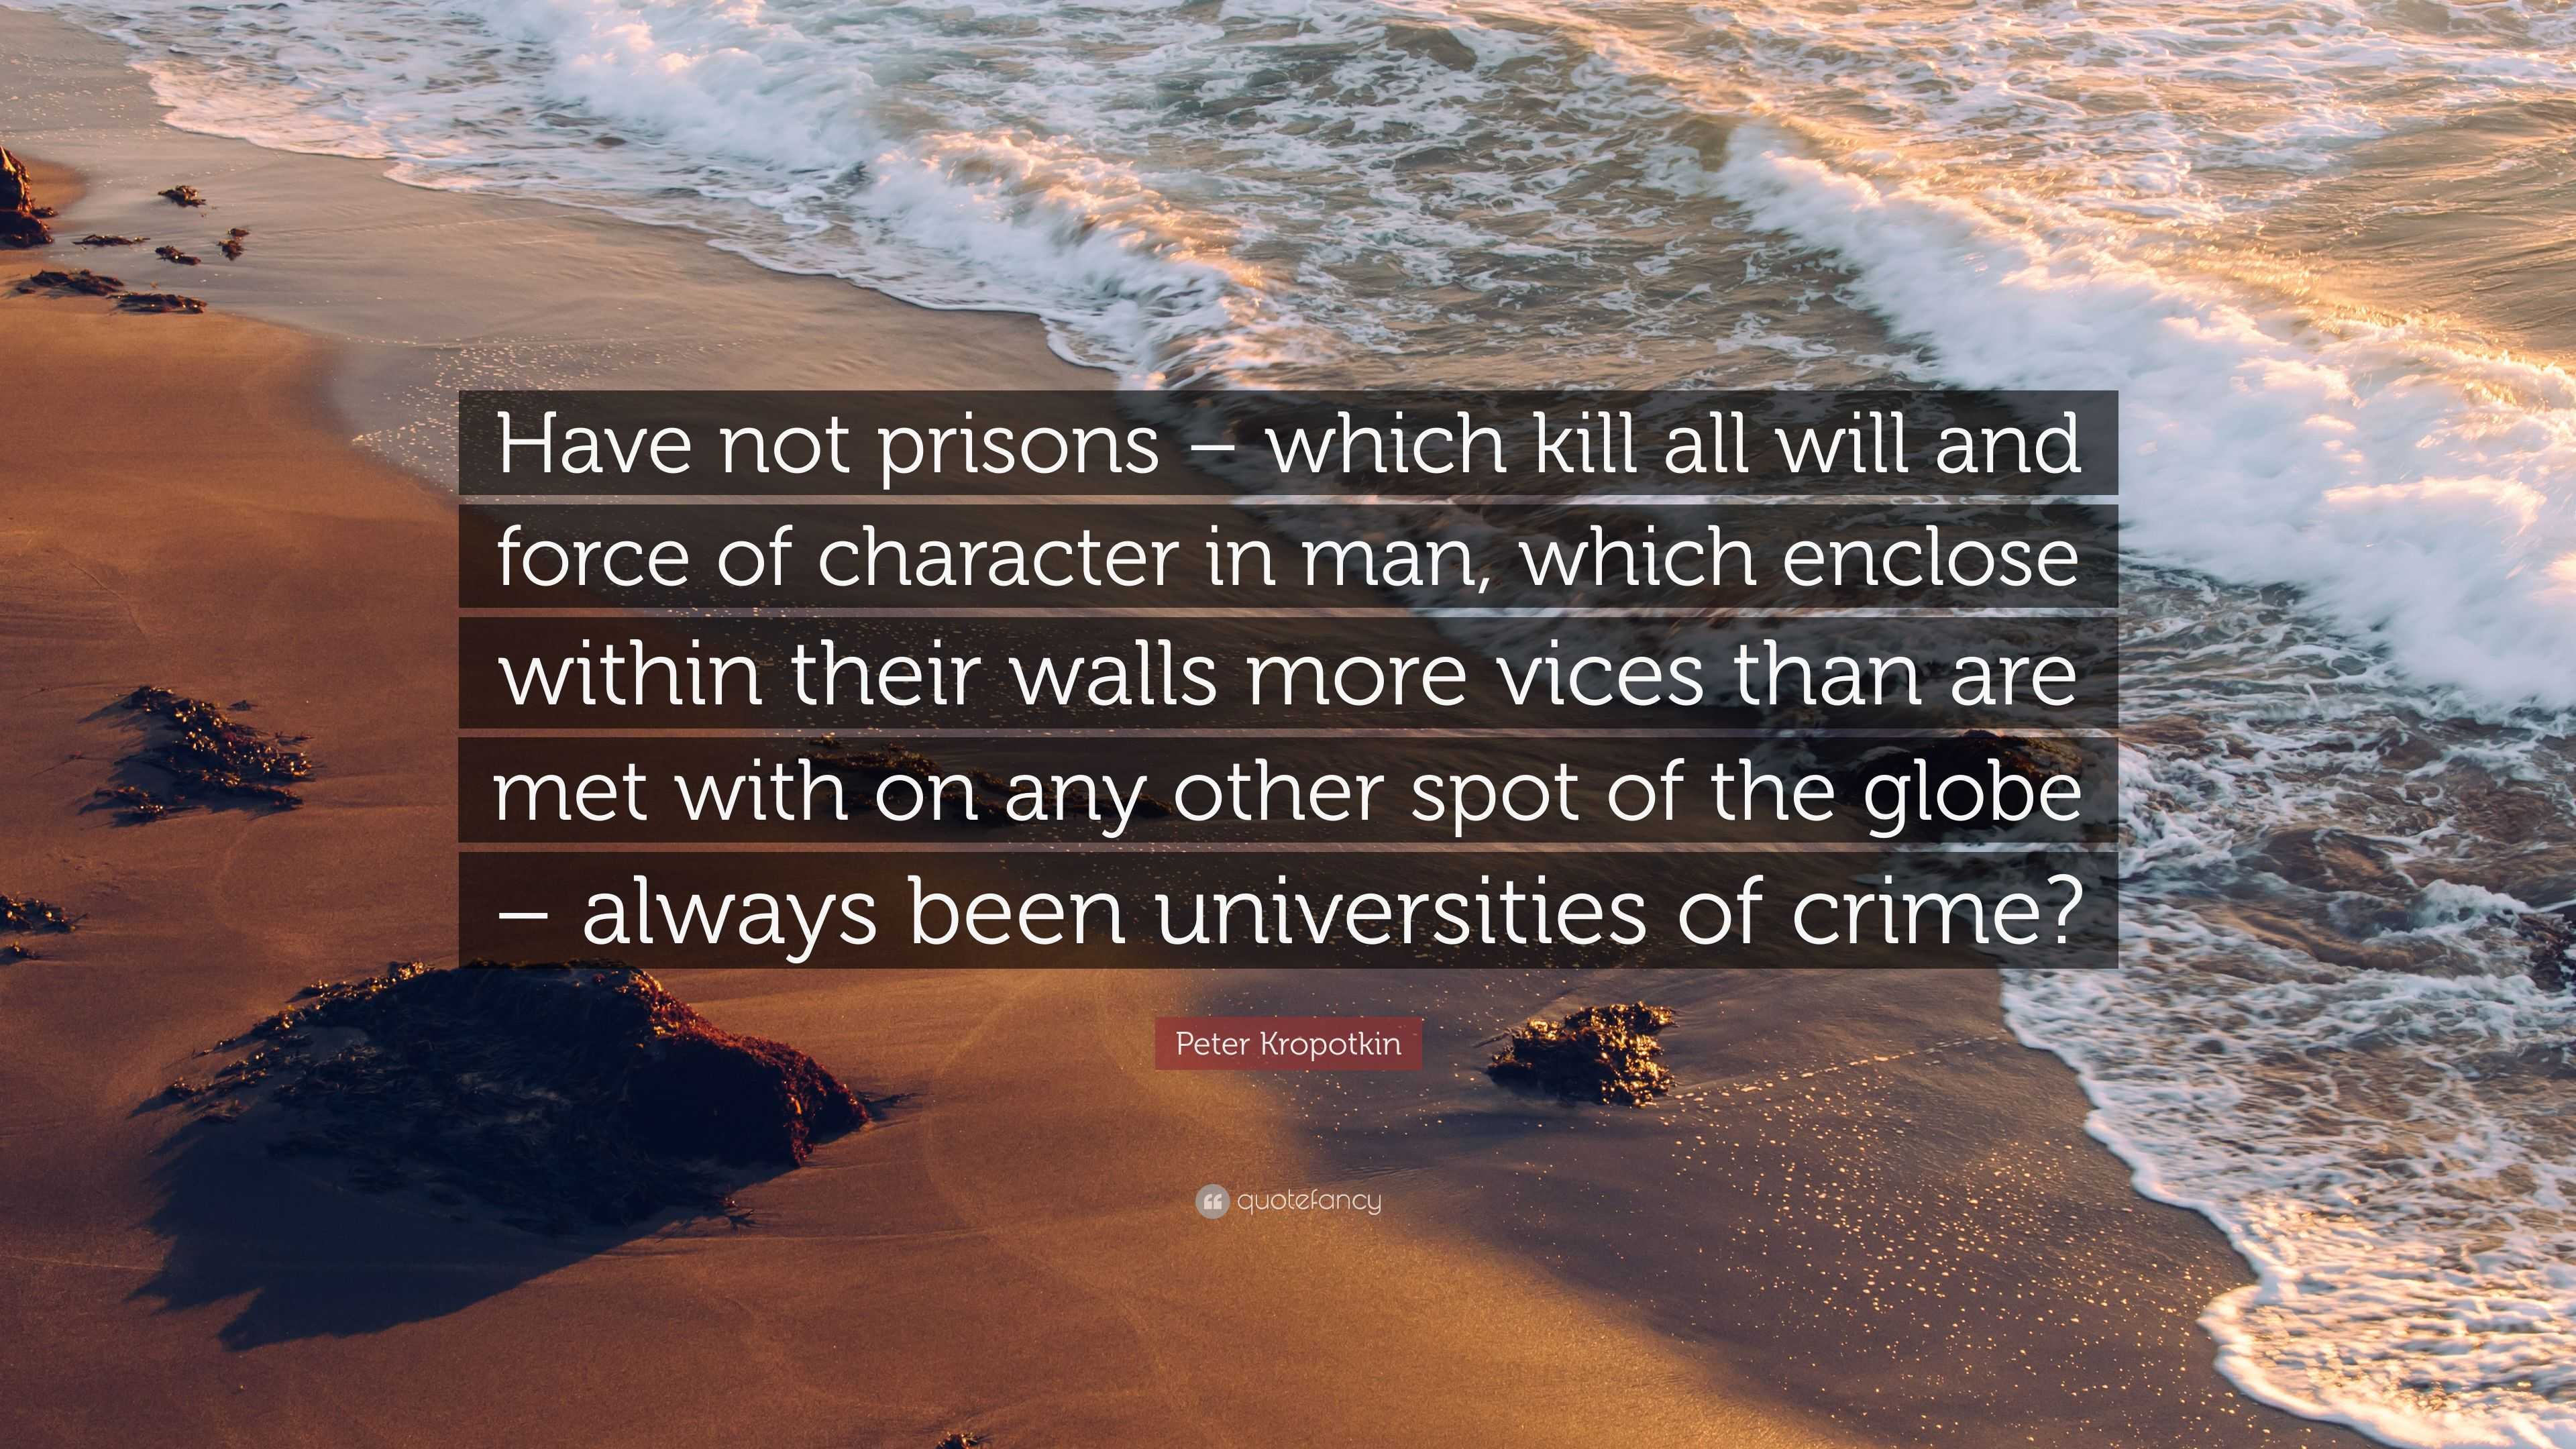 Peter Kropotkin Quote: “Have not prisons – which kill all will and